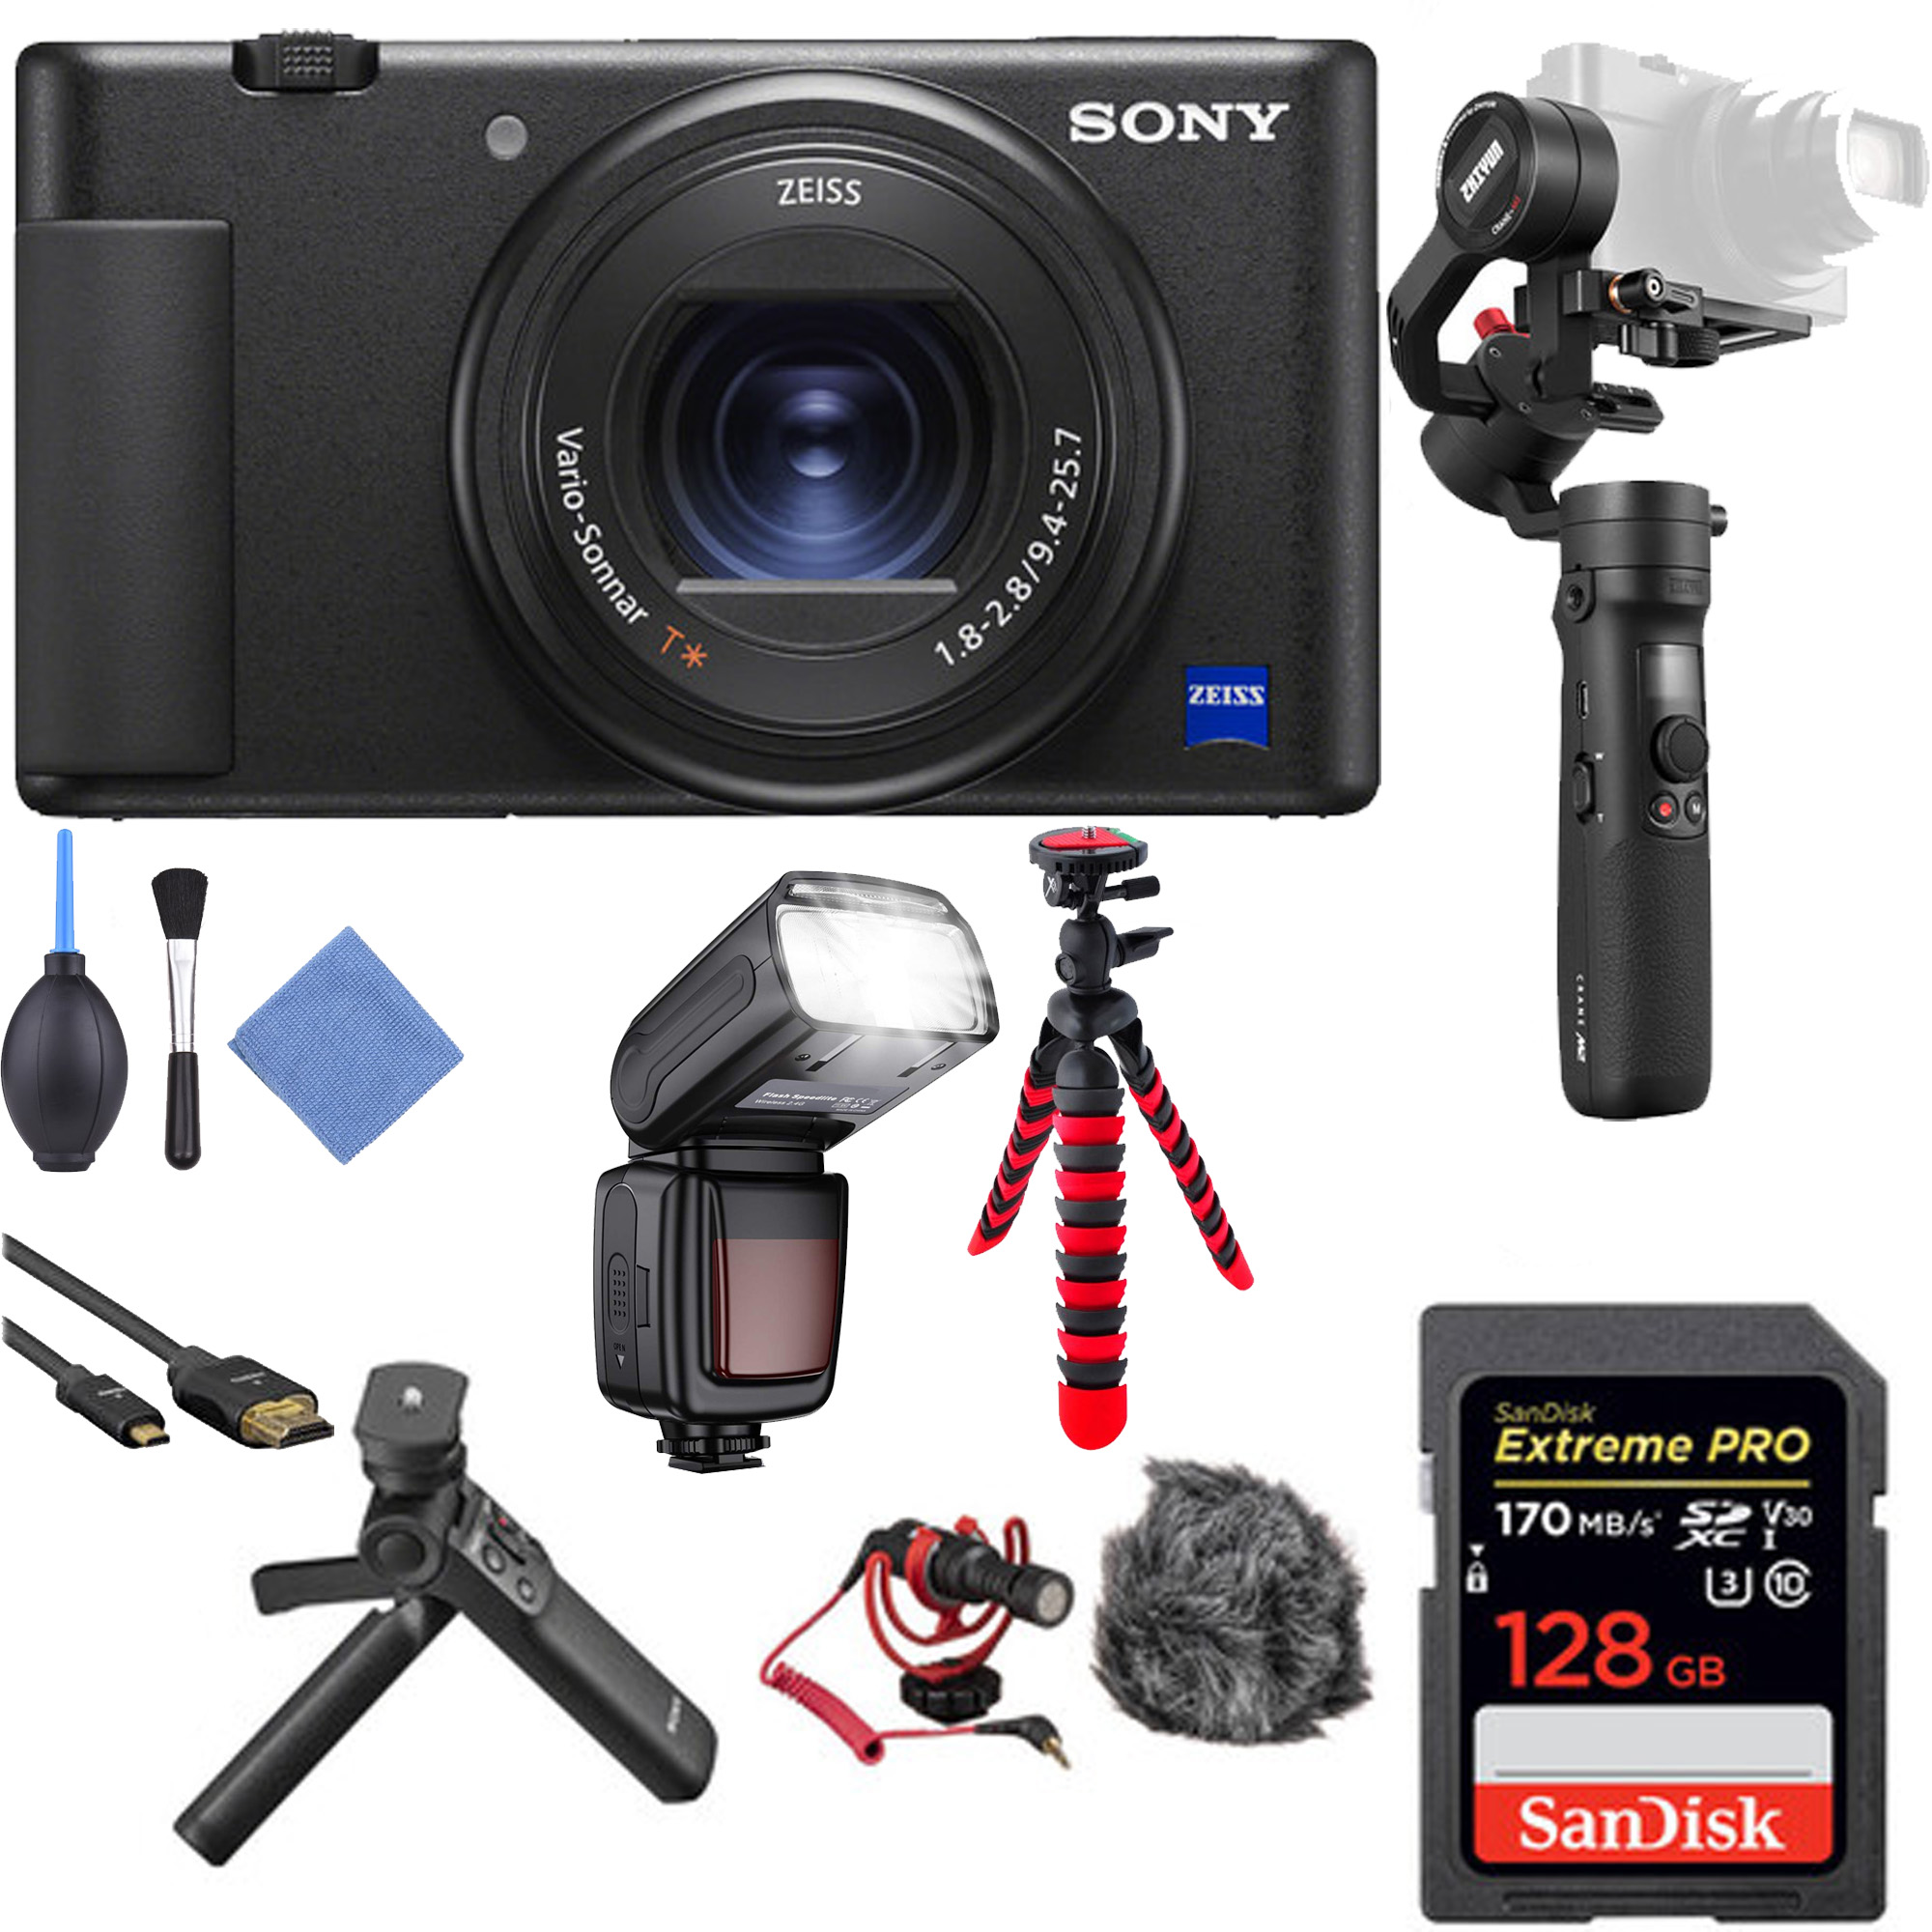 Sony ZV:1 Digital Camera with Shotgun Microphone, Gimbal Stabilizer, 128GB Sandisk Extreme Pro Memory Card, Sony Vlogger &amp; Accessories Bundle - image 1 of 8